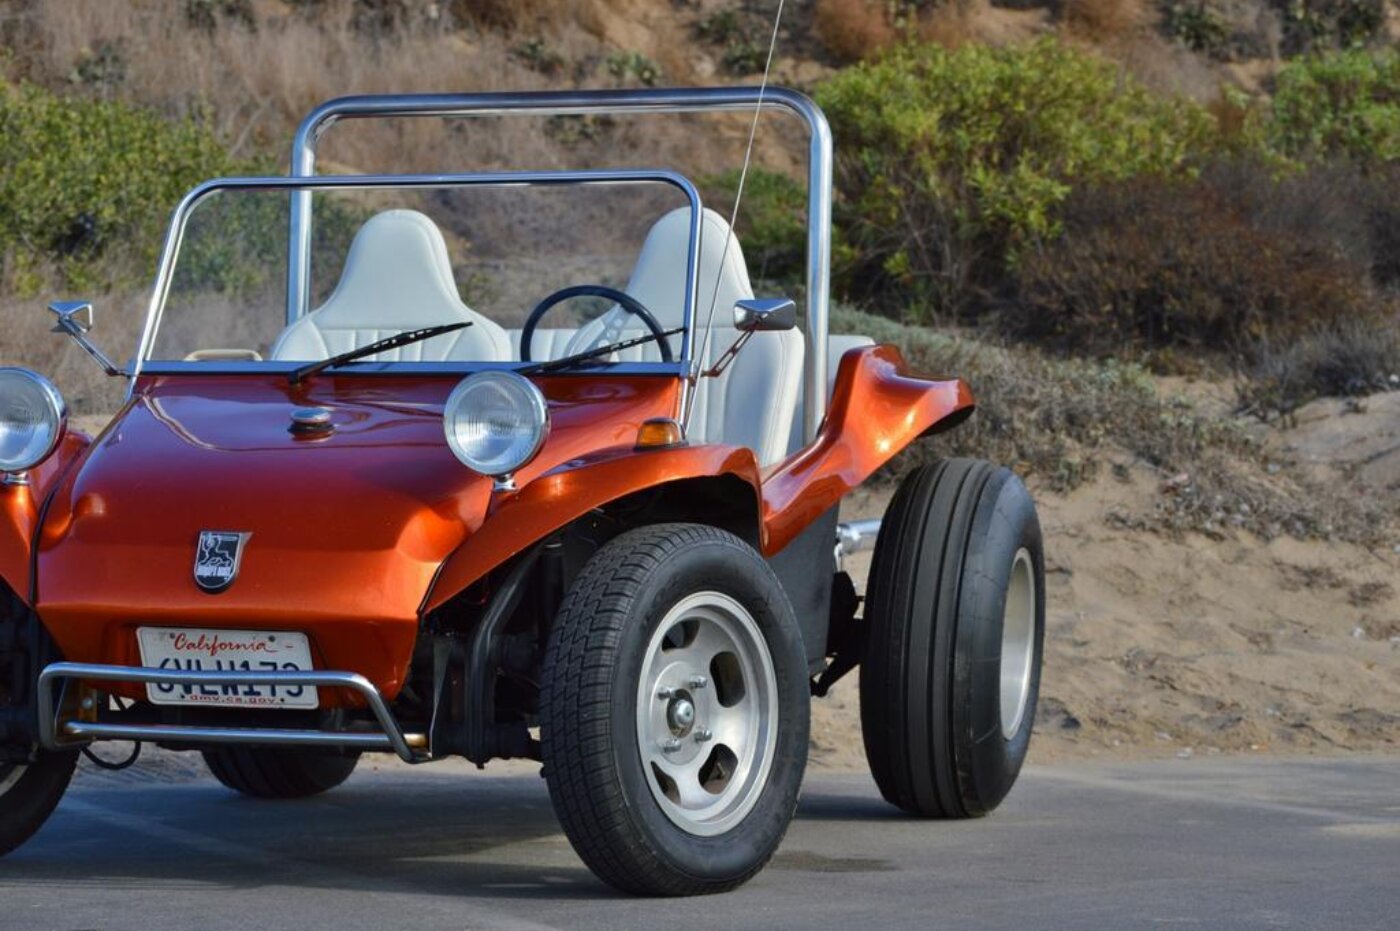 manx dune buggy for sale near me